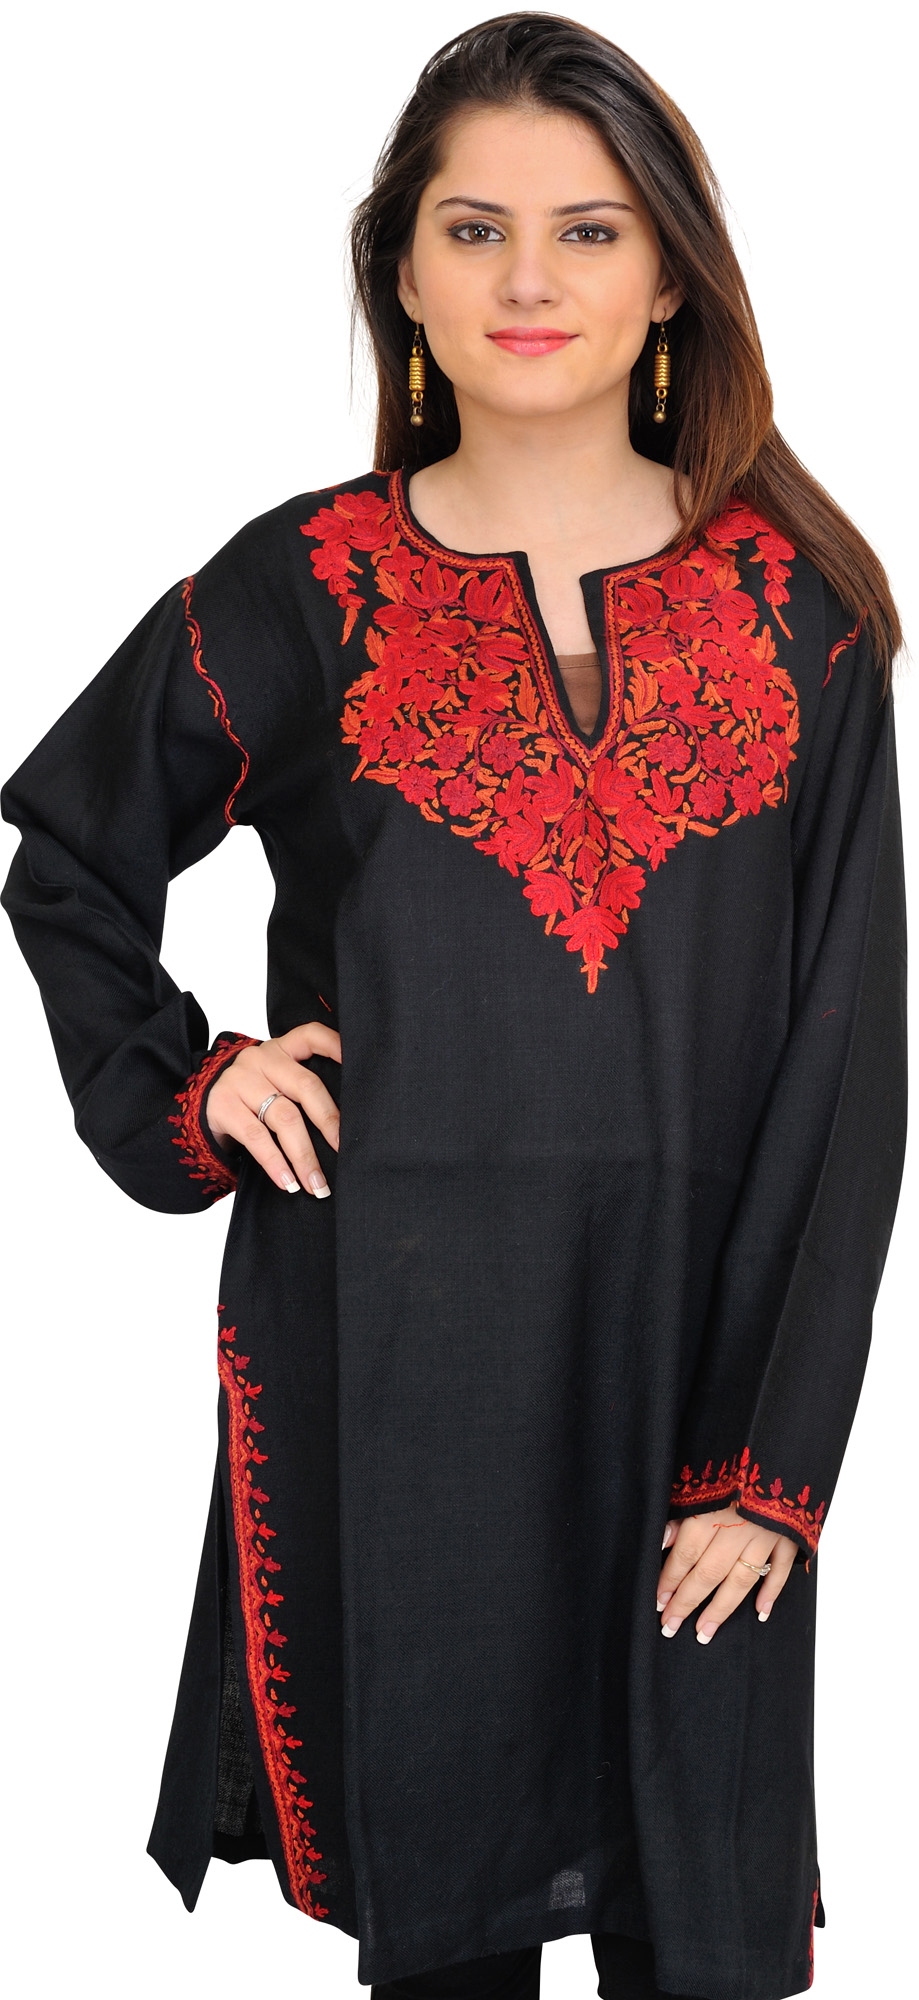 Phiran from Kashmir with Aari Hand-Embroidery on Neck | Exotic India Art